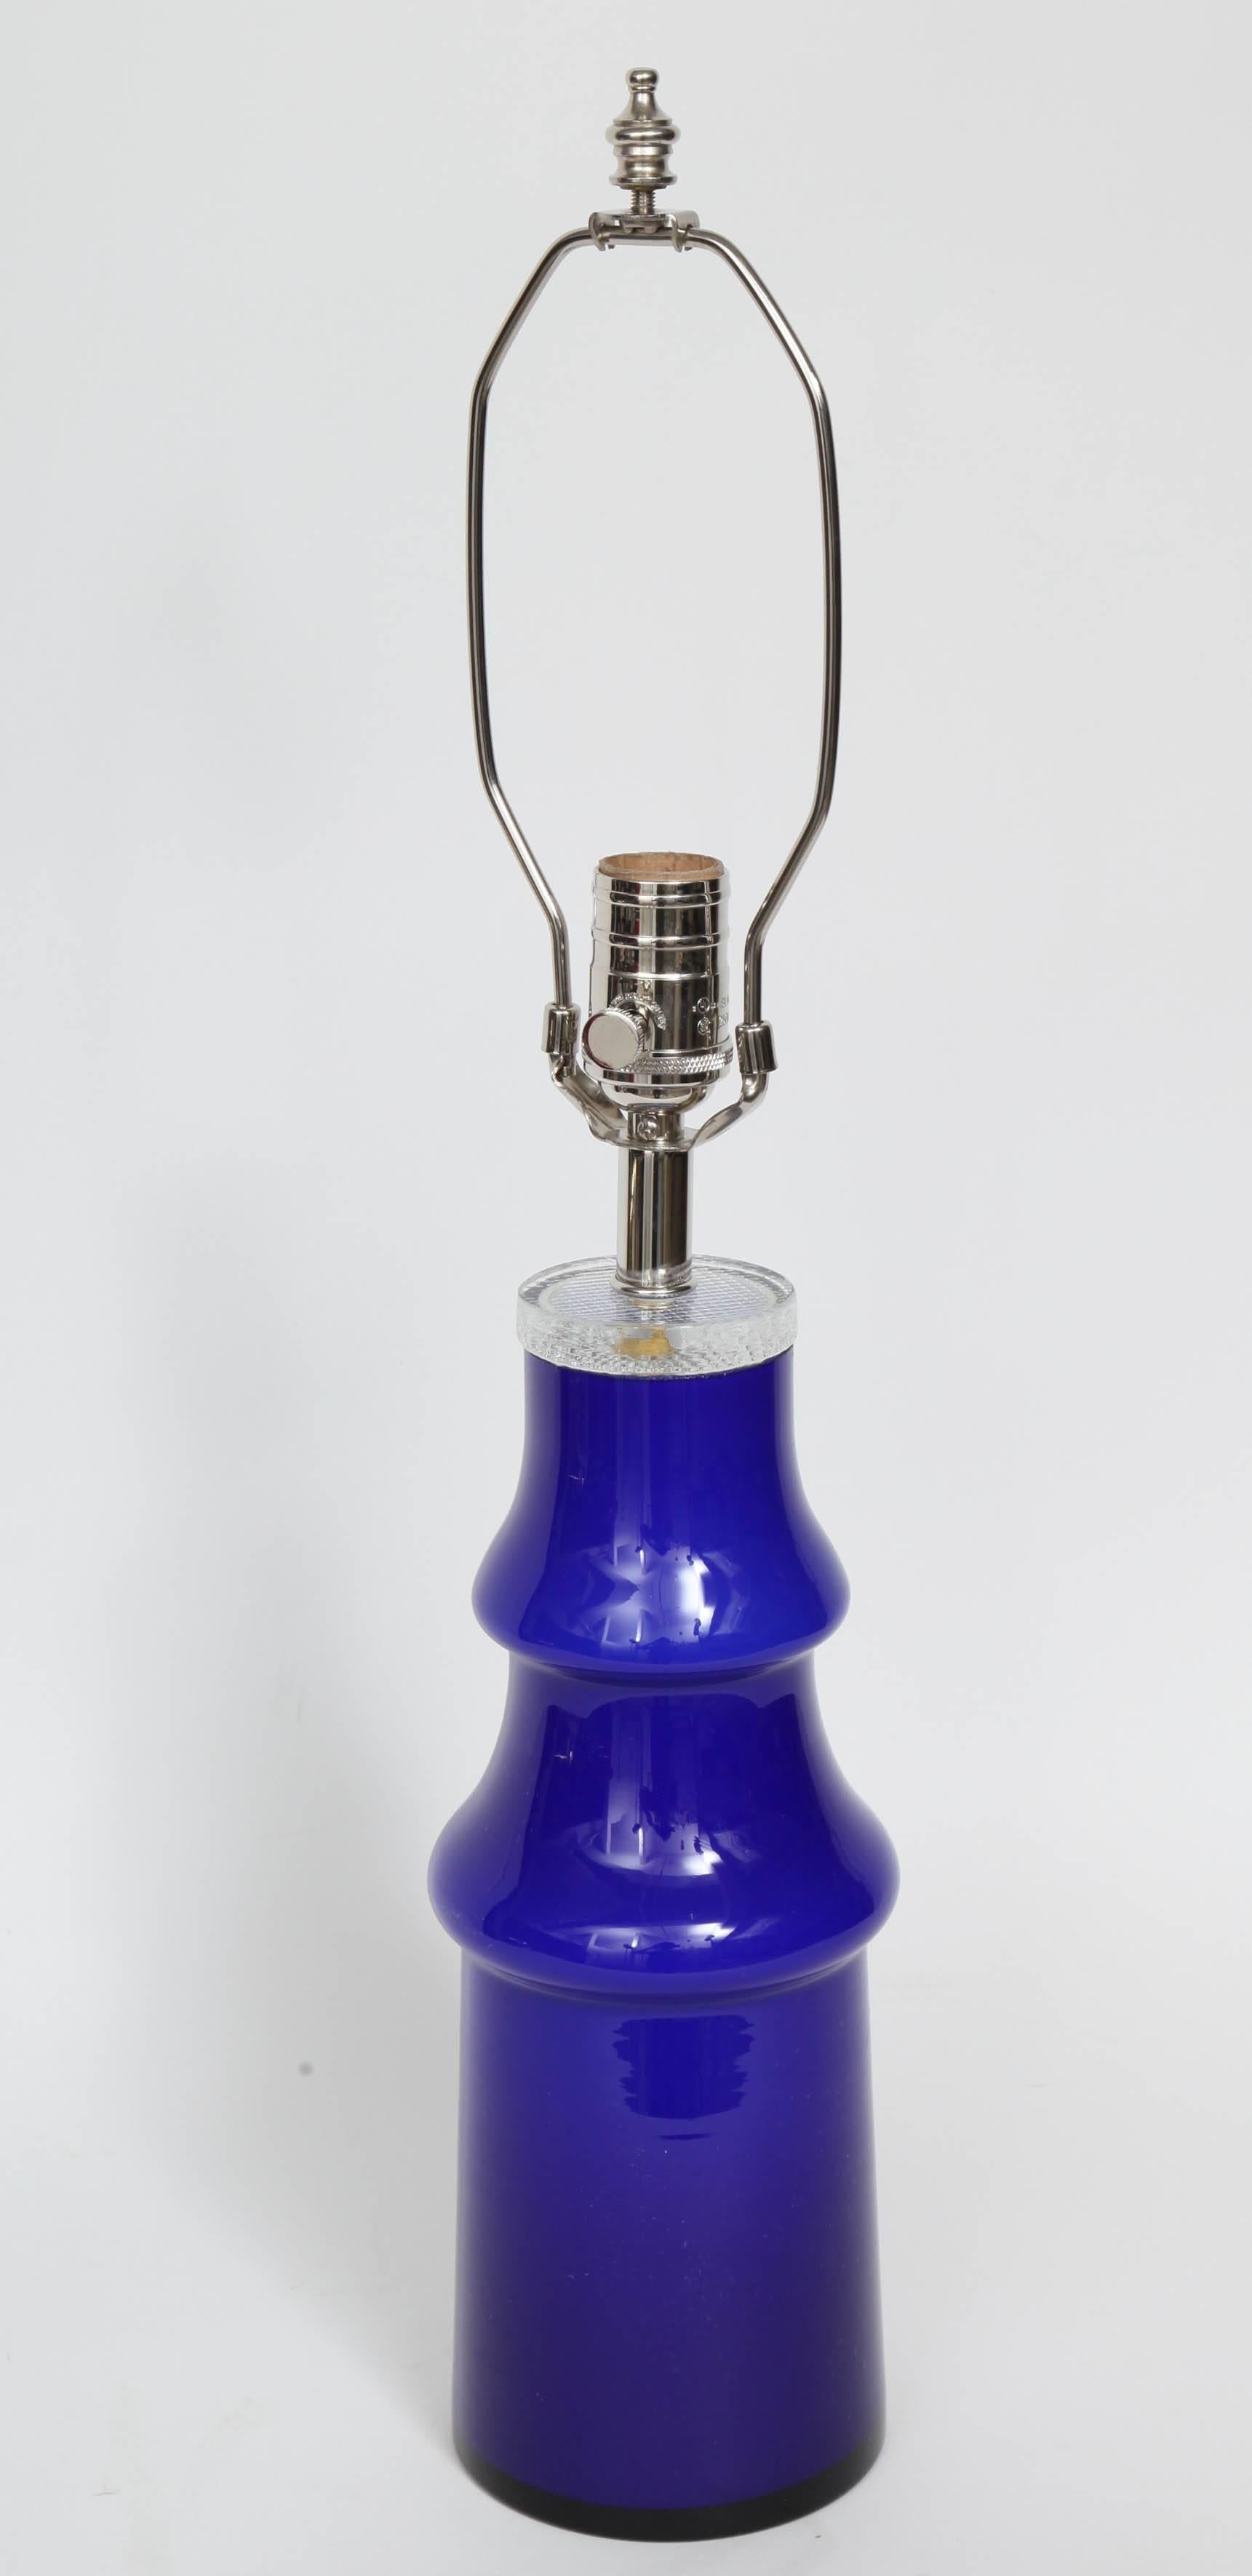 Swedish modern art glass lamp in a deep blue. Lamp has been rewired for the USA with nickel fittings and clear cord. 100W max bulb. Shade not included.